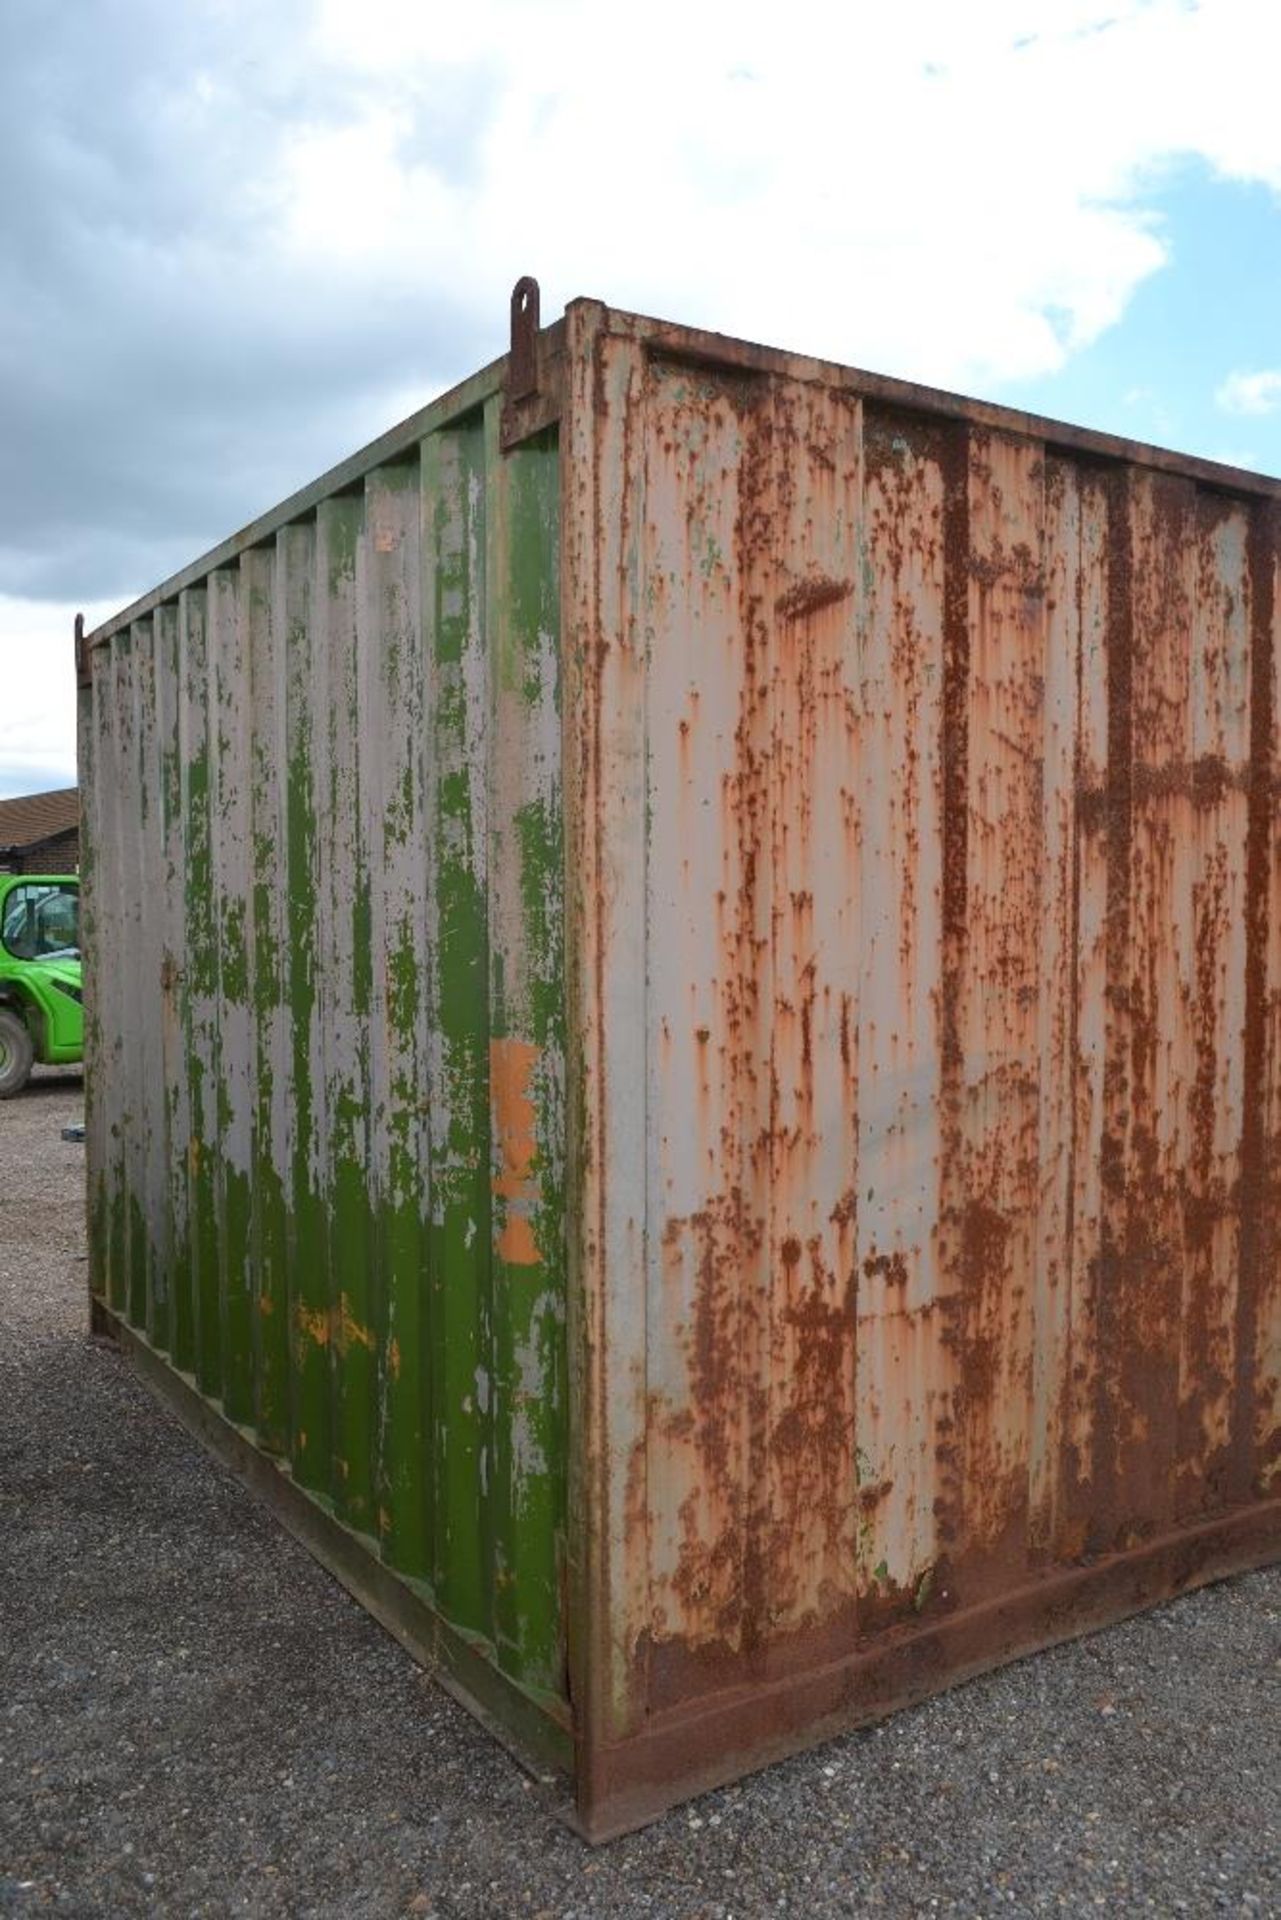 12ft x 8ft container. Loose contents not included. - Image 5 of 11